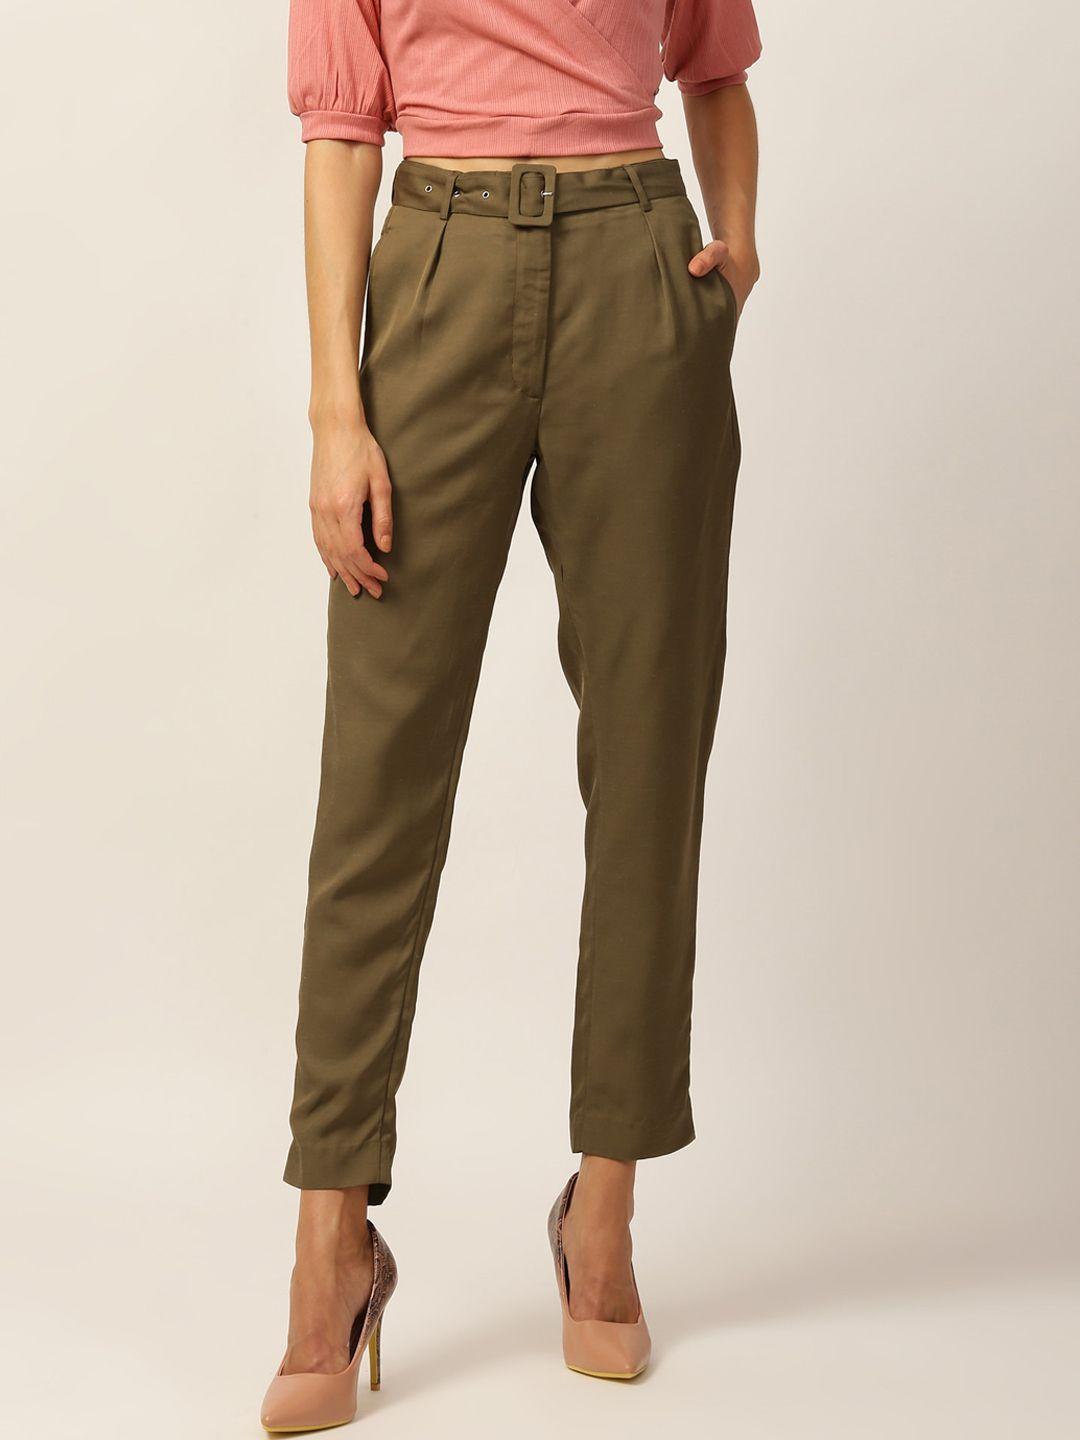 zoella women olive green cropped trousers